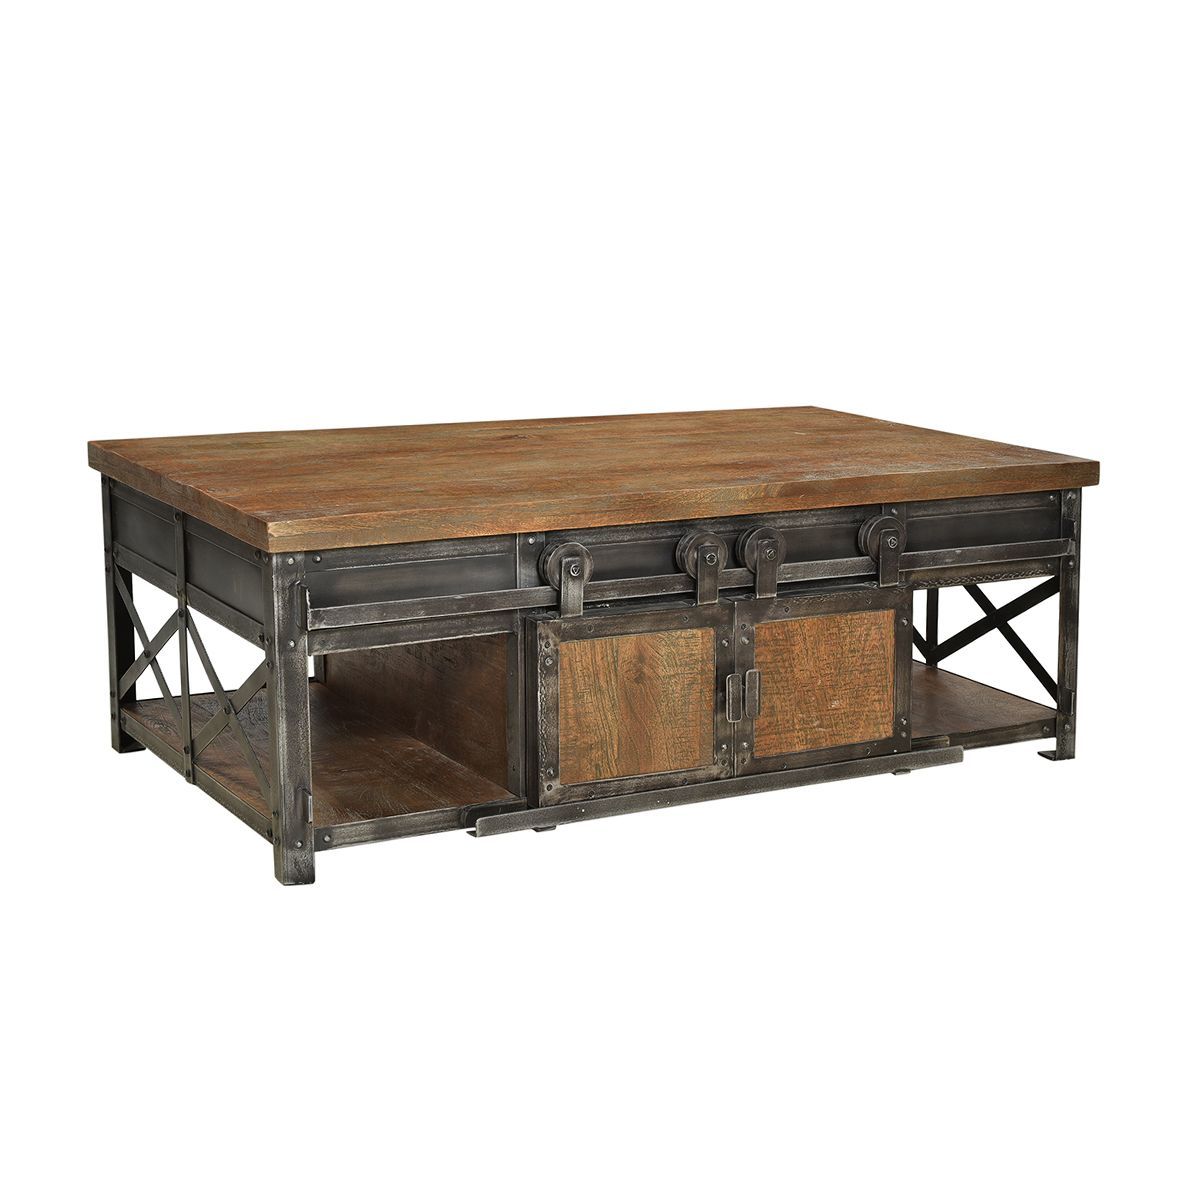 Reclaimed Mango Wood And Distressed Iron Coffee Table With Farmhouse For Coffee Tables With Sliding Barn Doors (View 5 of 20)